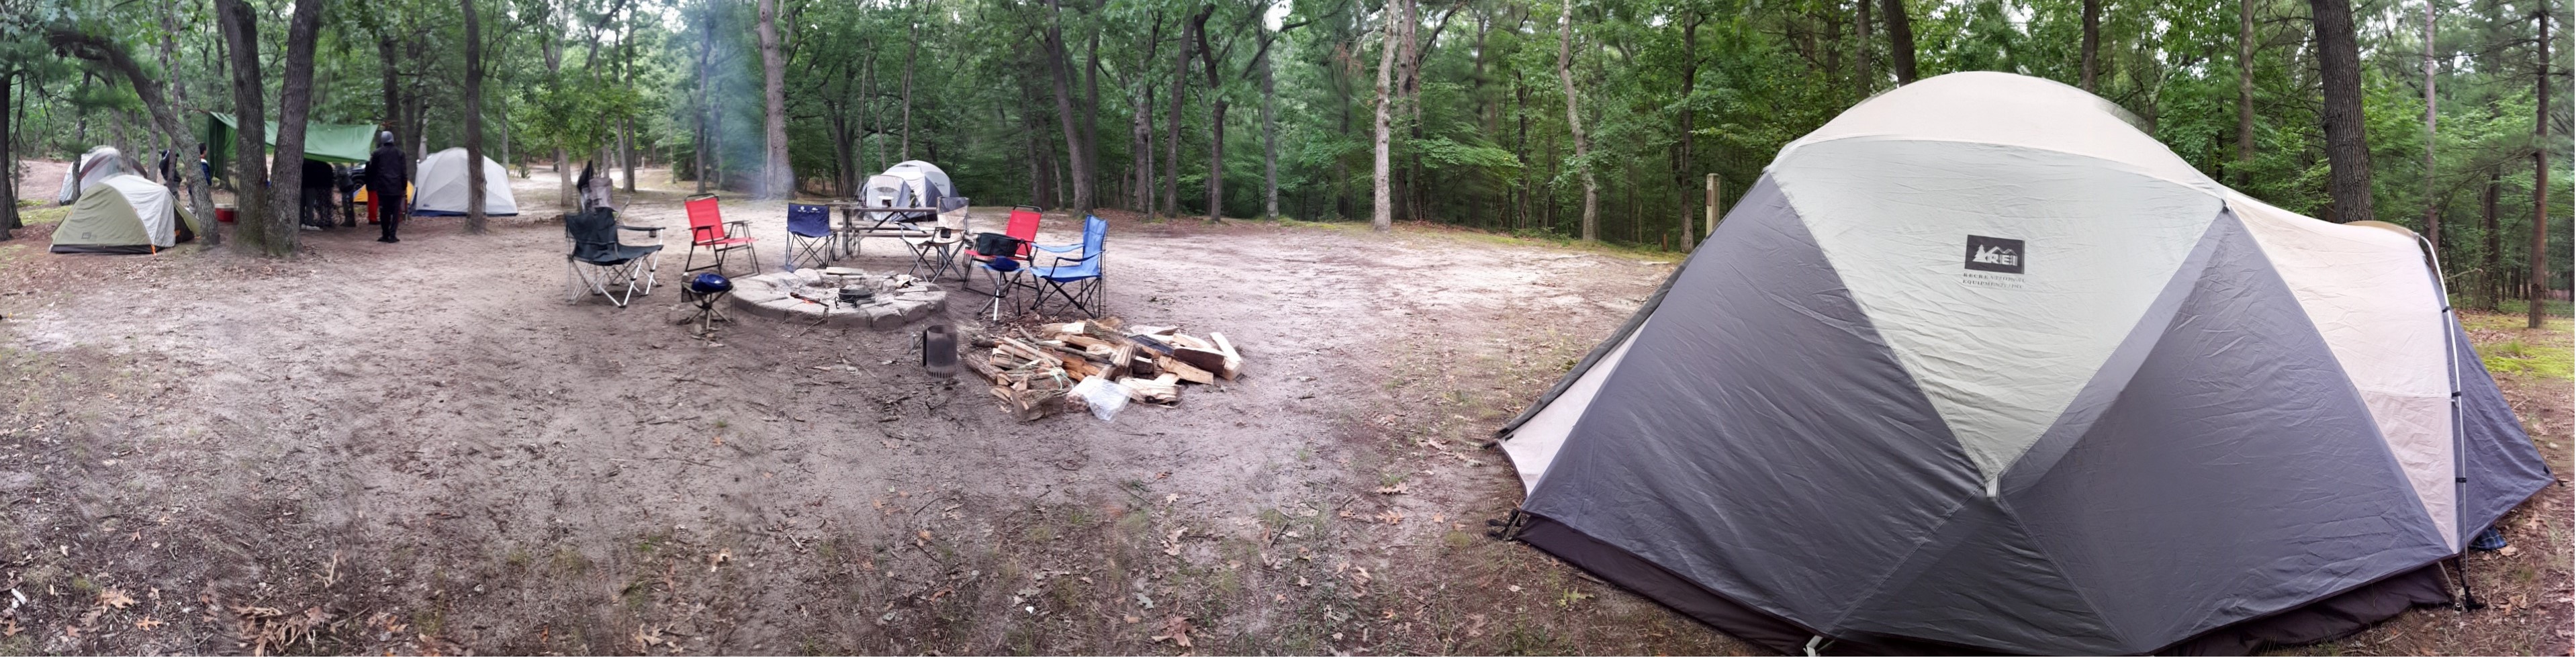 Campsite at Muskegon State Park.